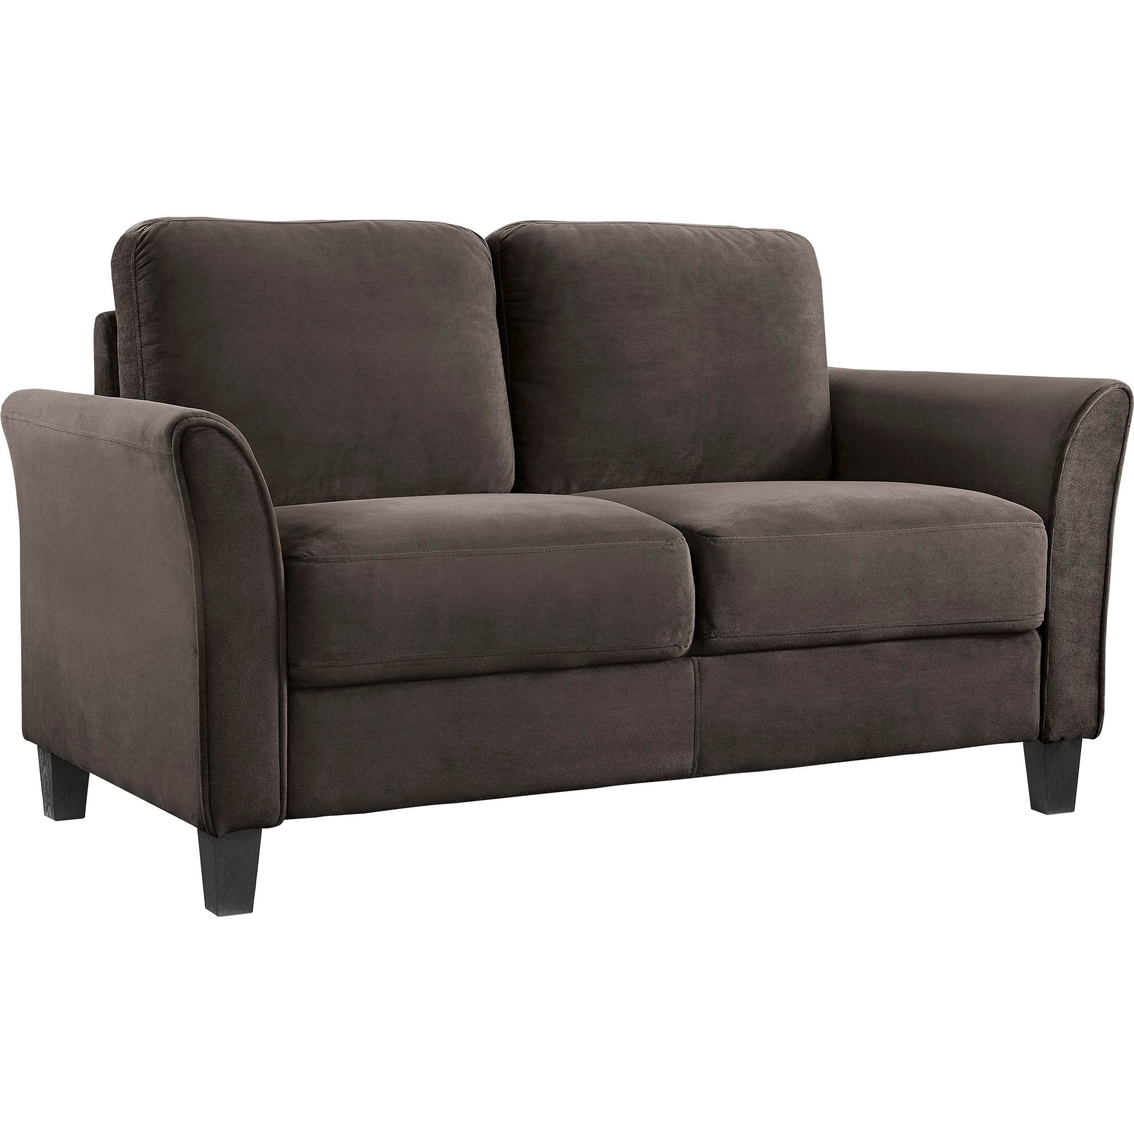 Lifestyle Solutions Westin Curved Arm Loveseat - Image 2 of 3